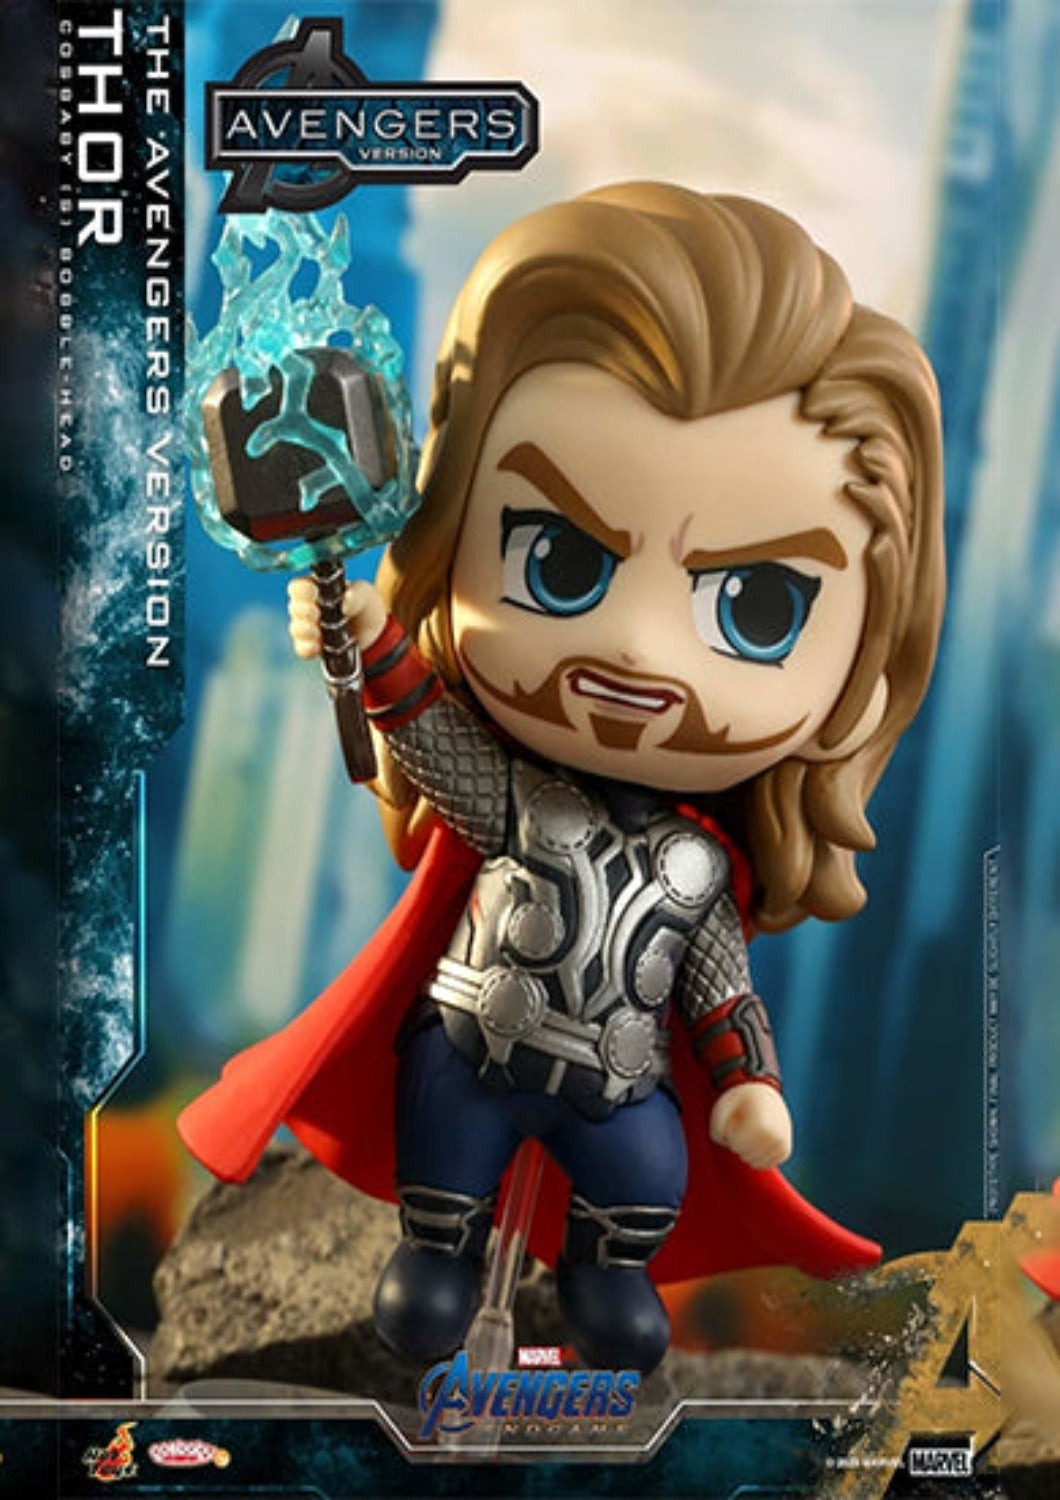 THOR (THE AVENGERS VERSION)